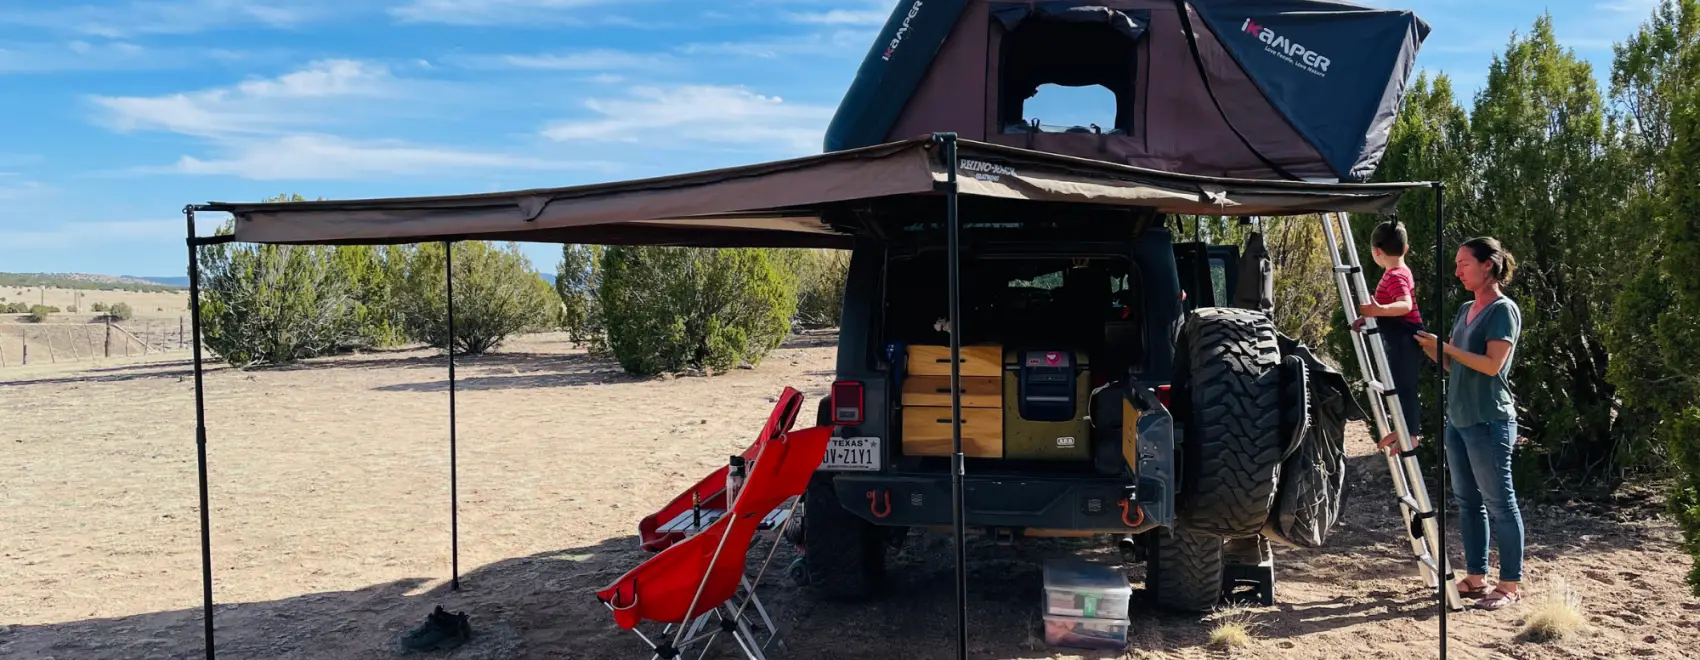 Overlanding Requires Intentional Self-deprivation